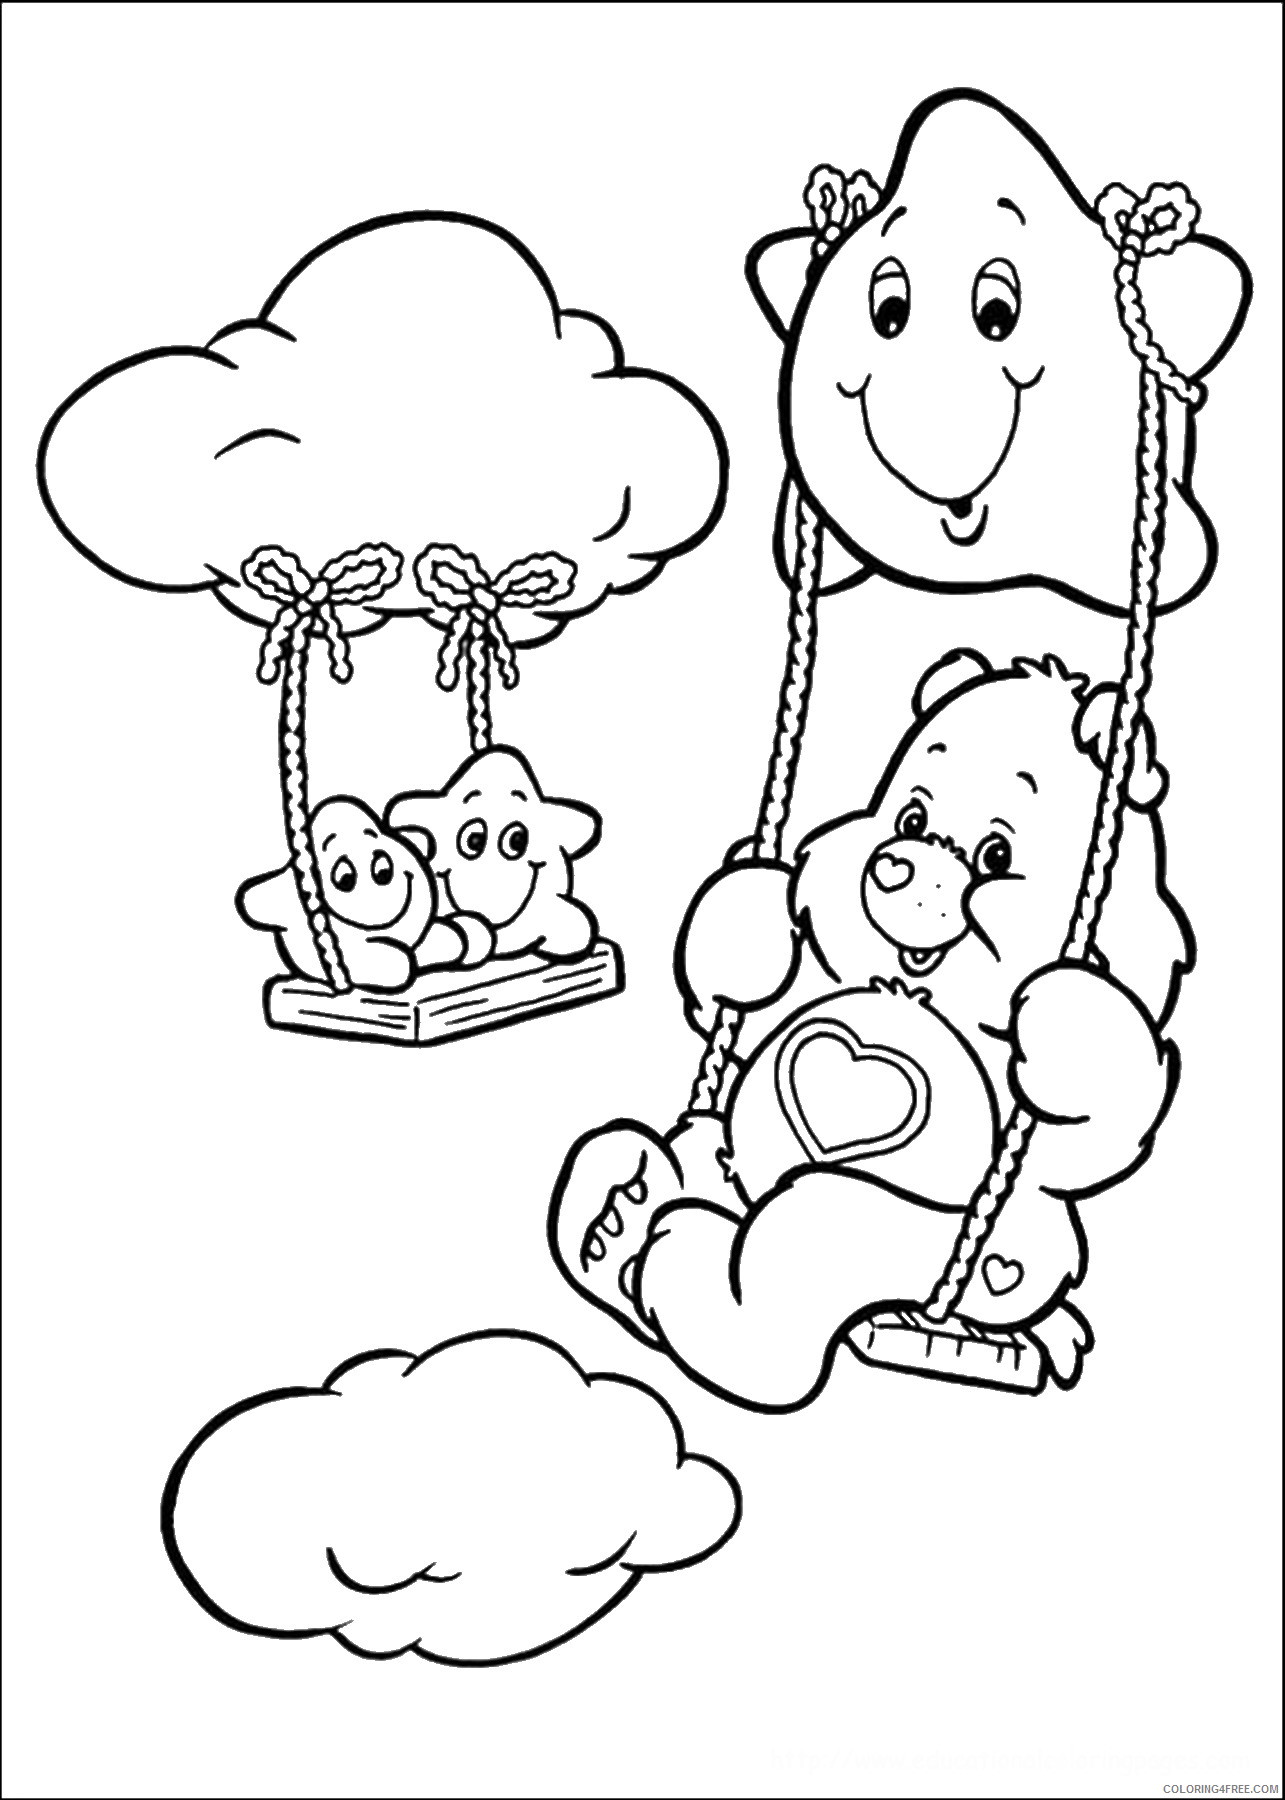 Care Bears Coloring Pages Cartoons care_bears_cl_39 Printable 2020 1573 Coloring4free